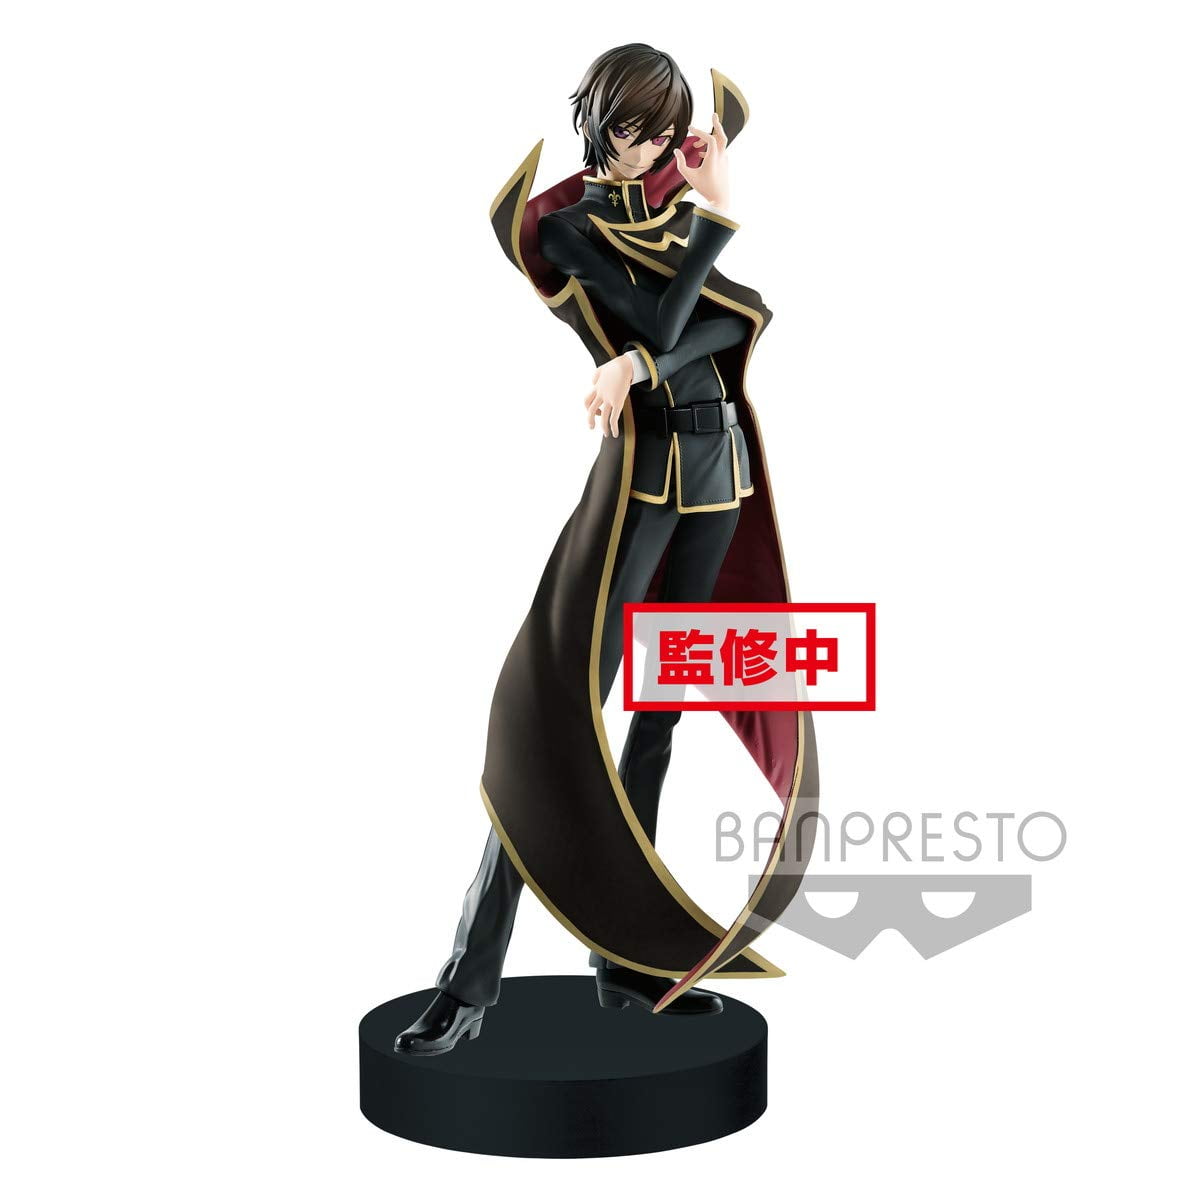 BP39147 Code Geass Lelouch of The Rebellion Exq Figure-Lelouch 